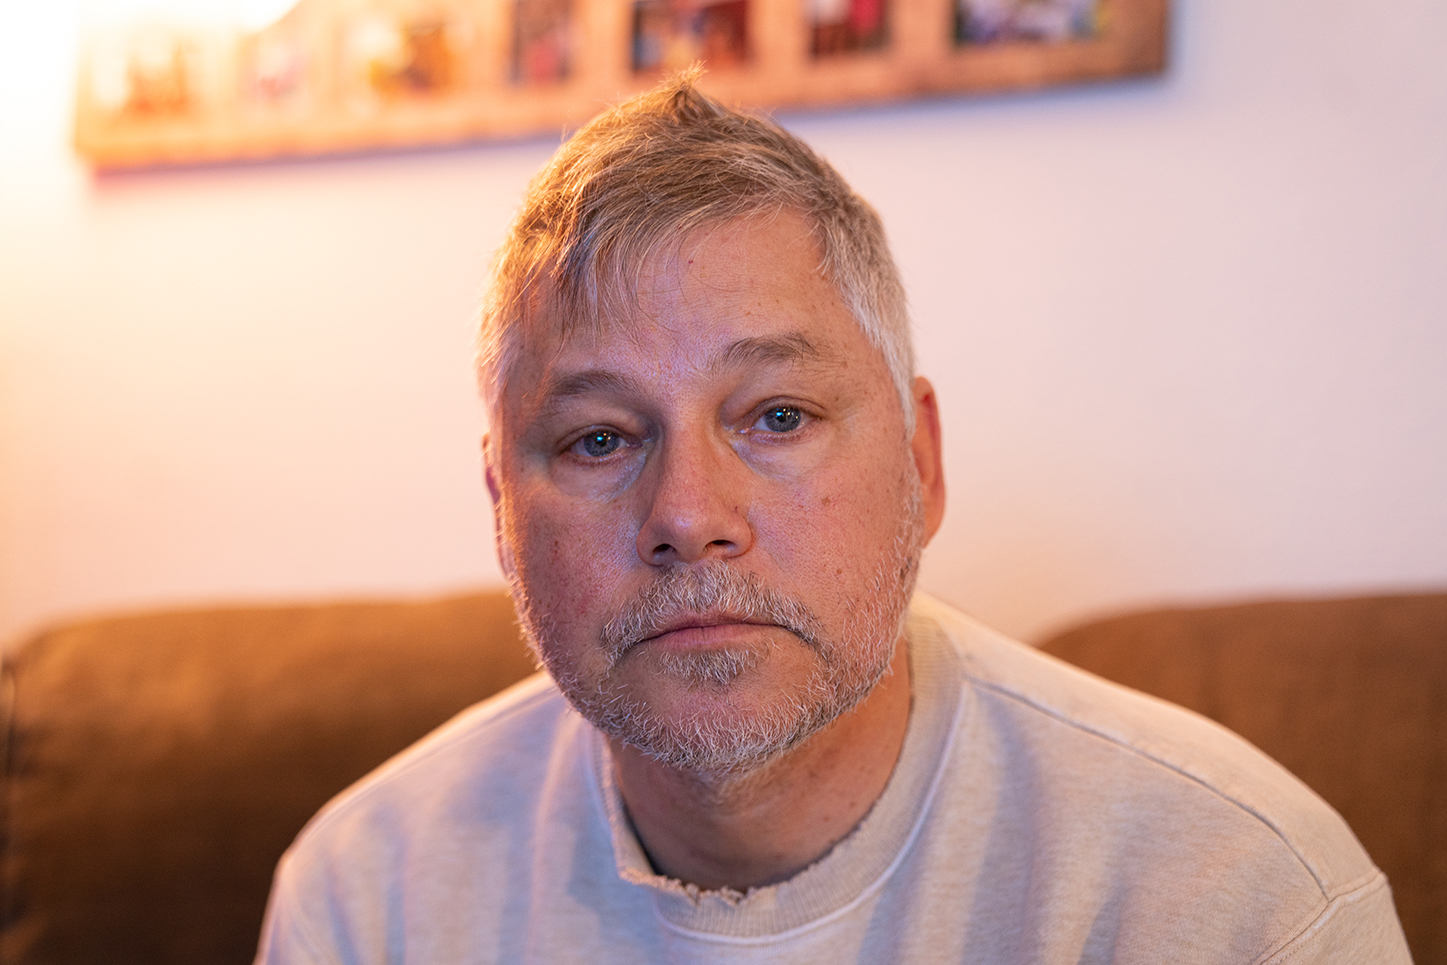 David’s a divorcé who worked a union job (heavy machinery) for decades before retiring. He finished his cancer treatment over a year ago and has shown no evidence of disease since then, but has struggled to bounce back in other ways.